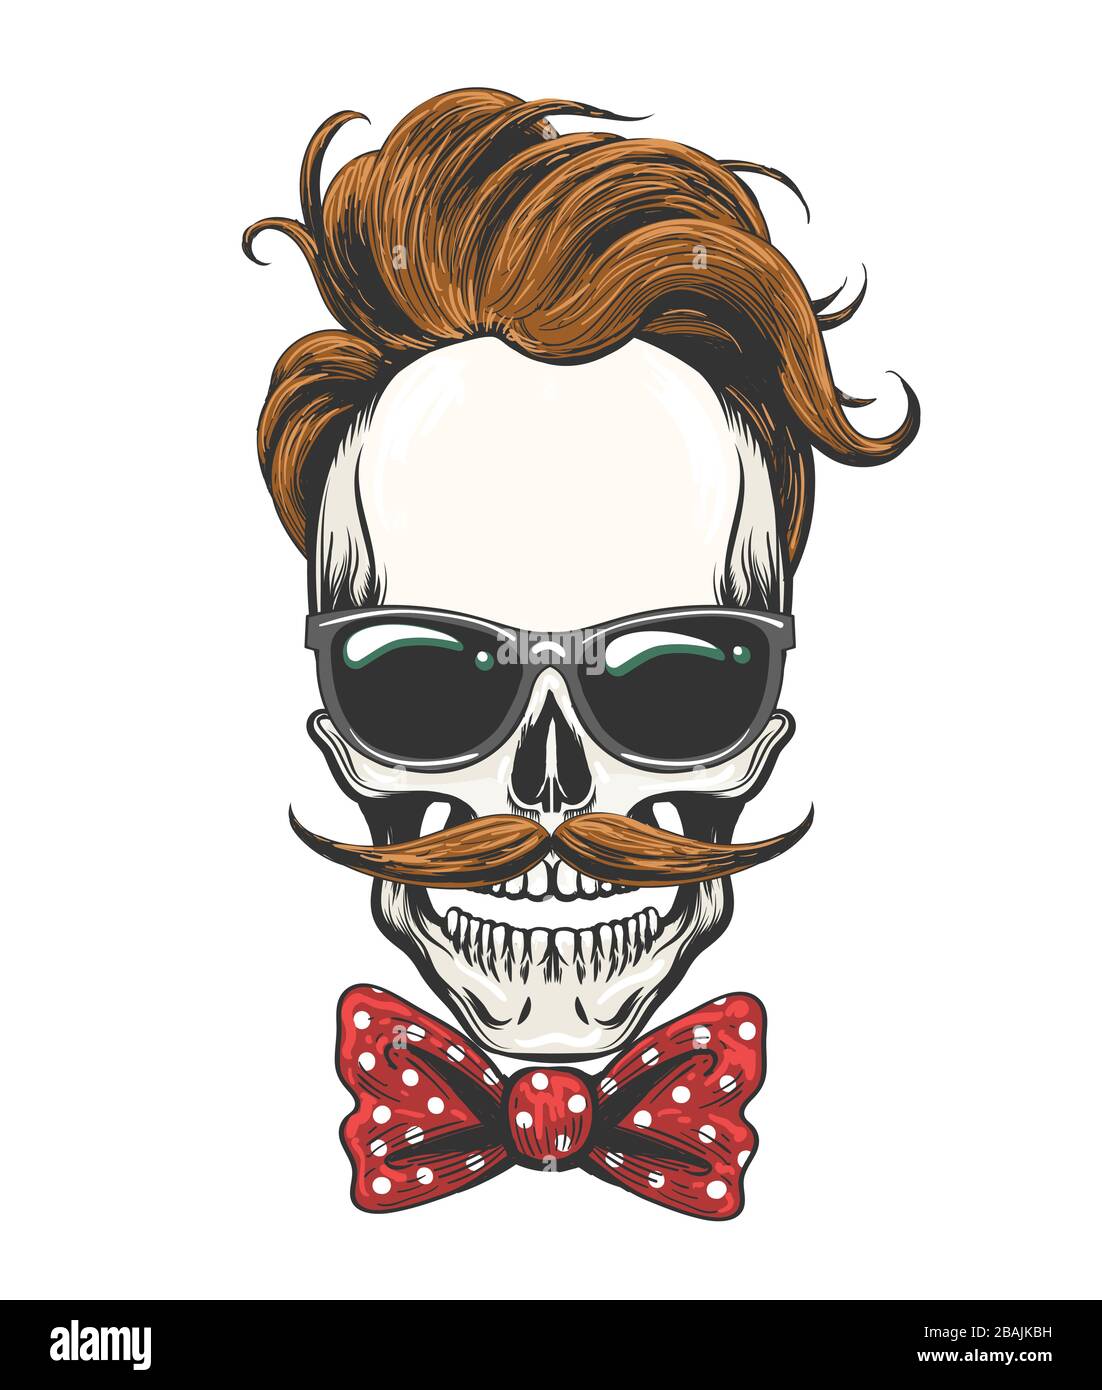 Skull with a hairstyle, mustache in a glasses and bow tie. Vector illustration. Stock Vector